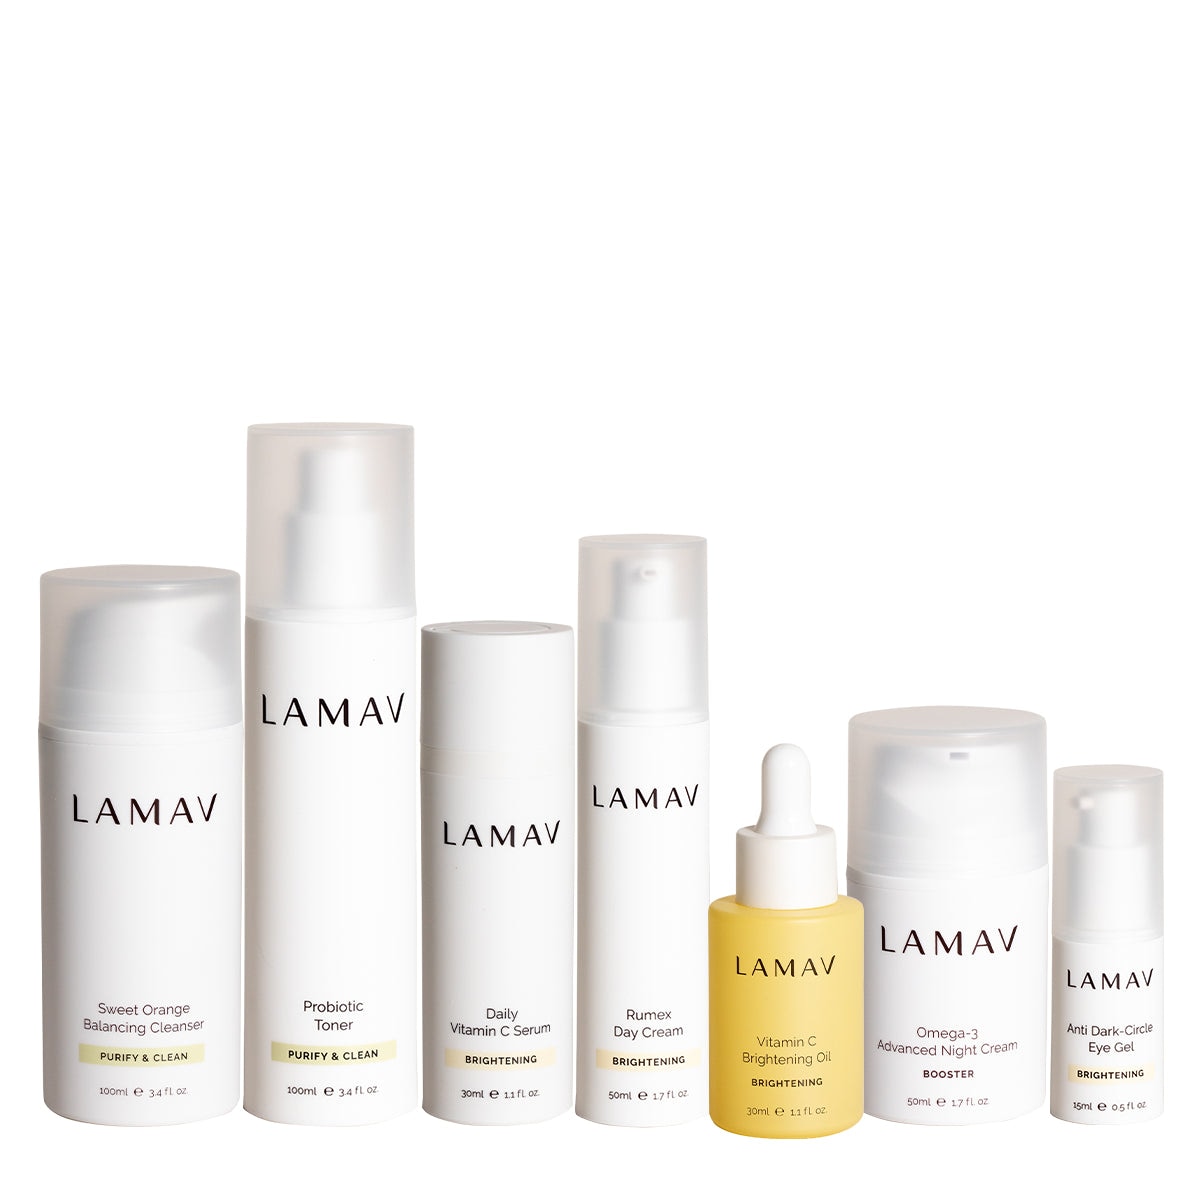 LAMAV Age Defence Complete Skincare collection - Oily/Combination Skin